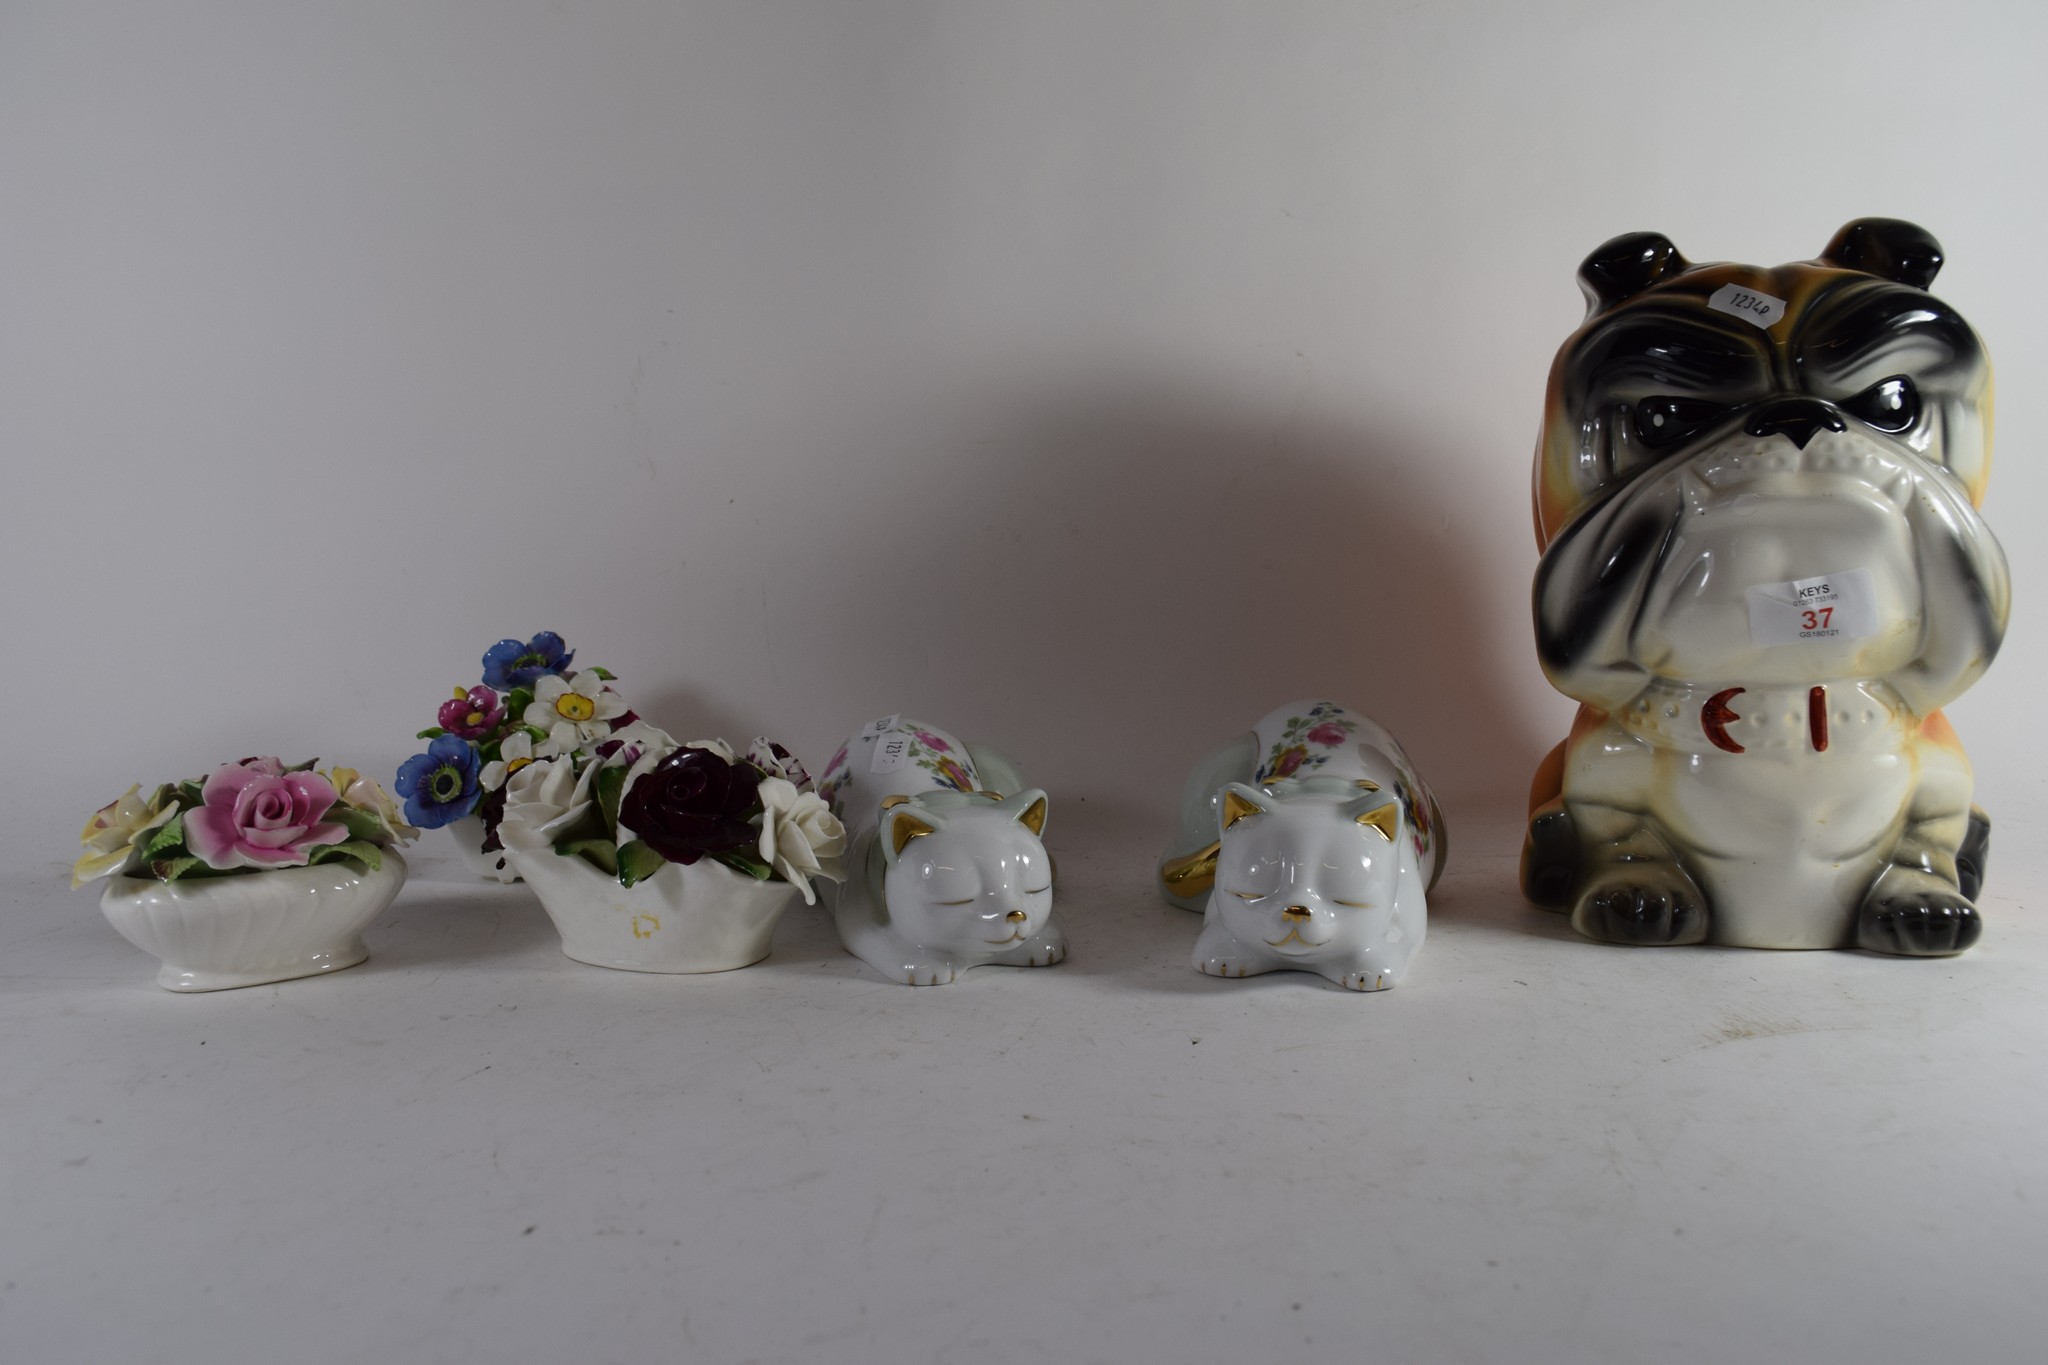 LARGE POTTERY MODEL OF A BULLDOG WITH PAIR OF POTTERY CATS AND OTHER POTTERY FLOWER HOLDERS